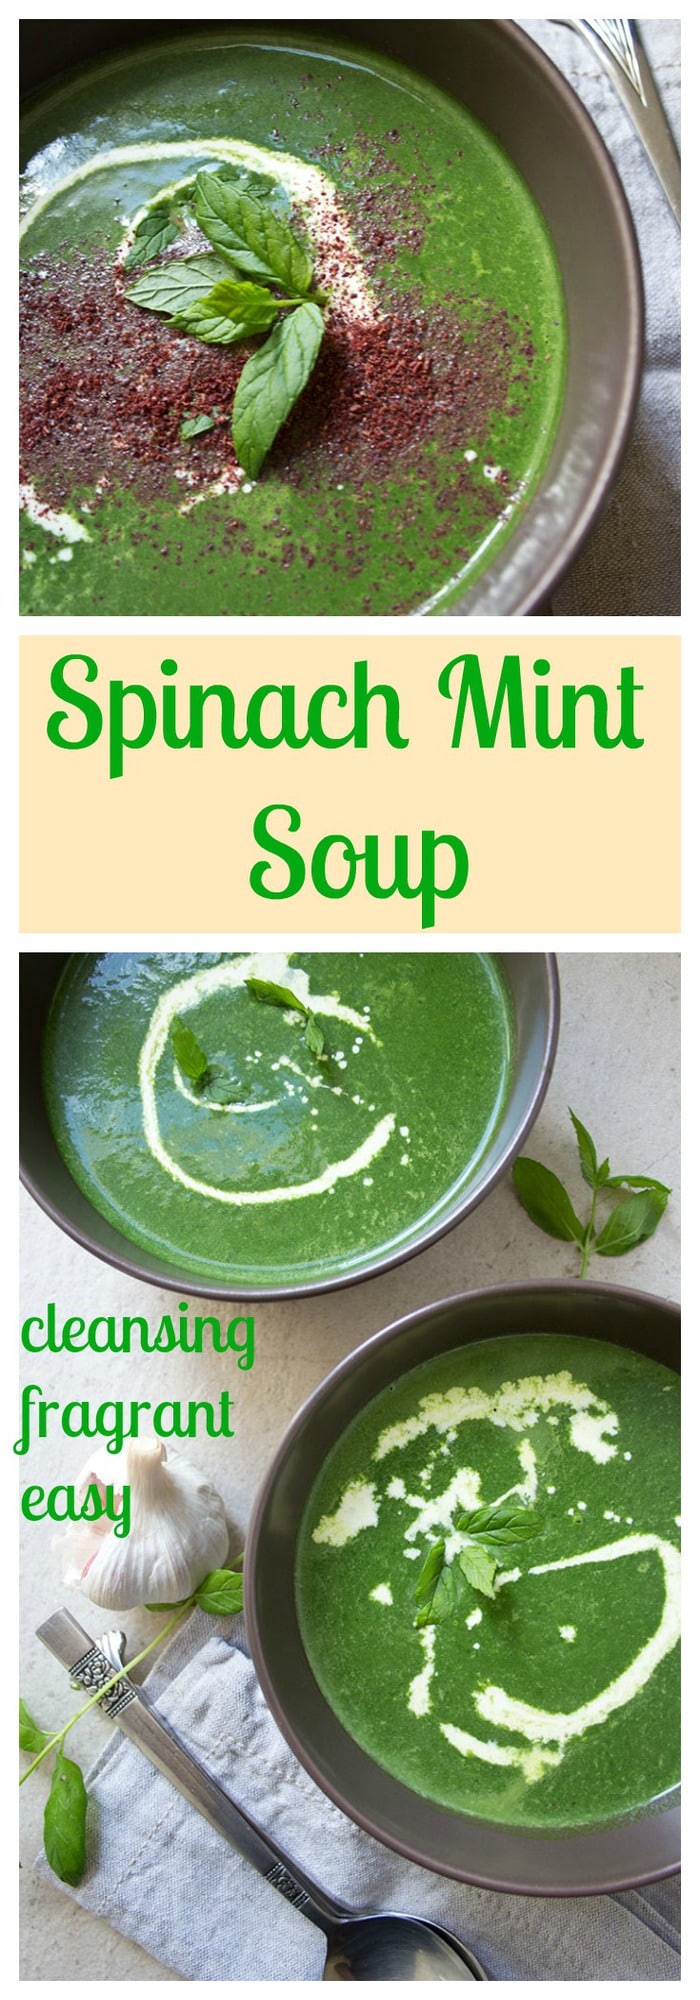 Cleansing, fresh and simple: This fragrant spinach mint soup gets an added kick from the tangy, lemony spice sumac.